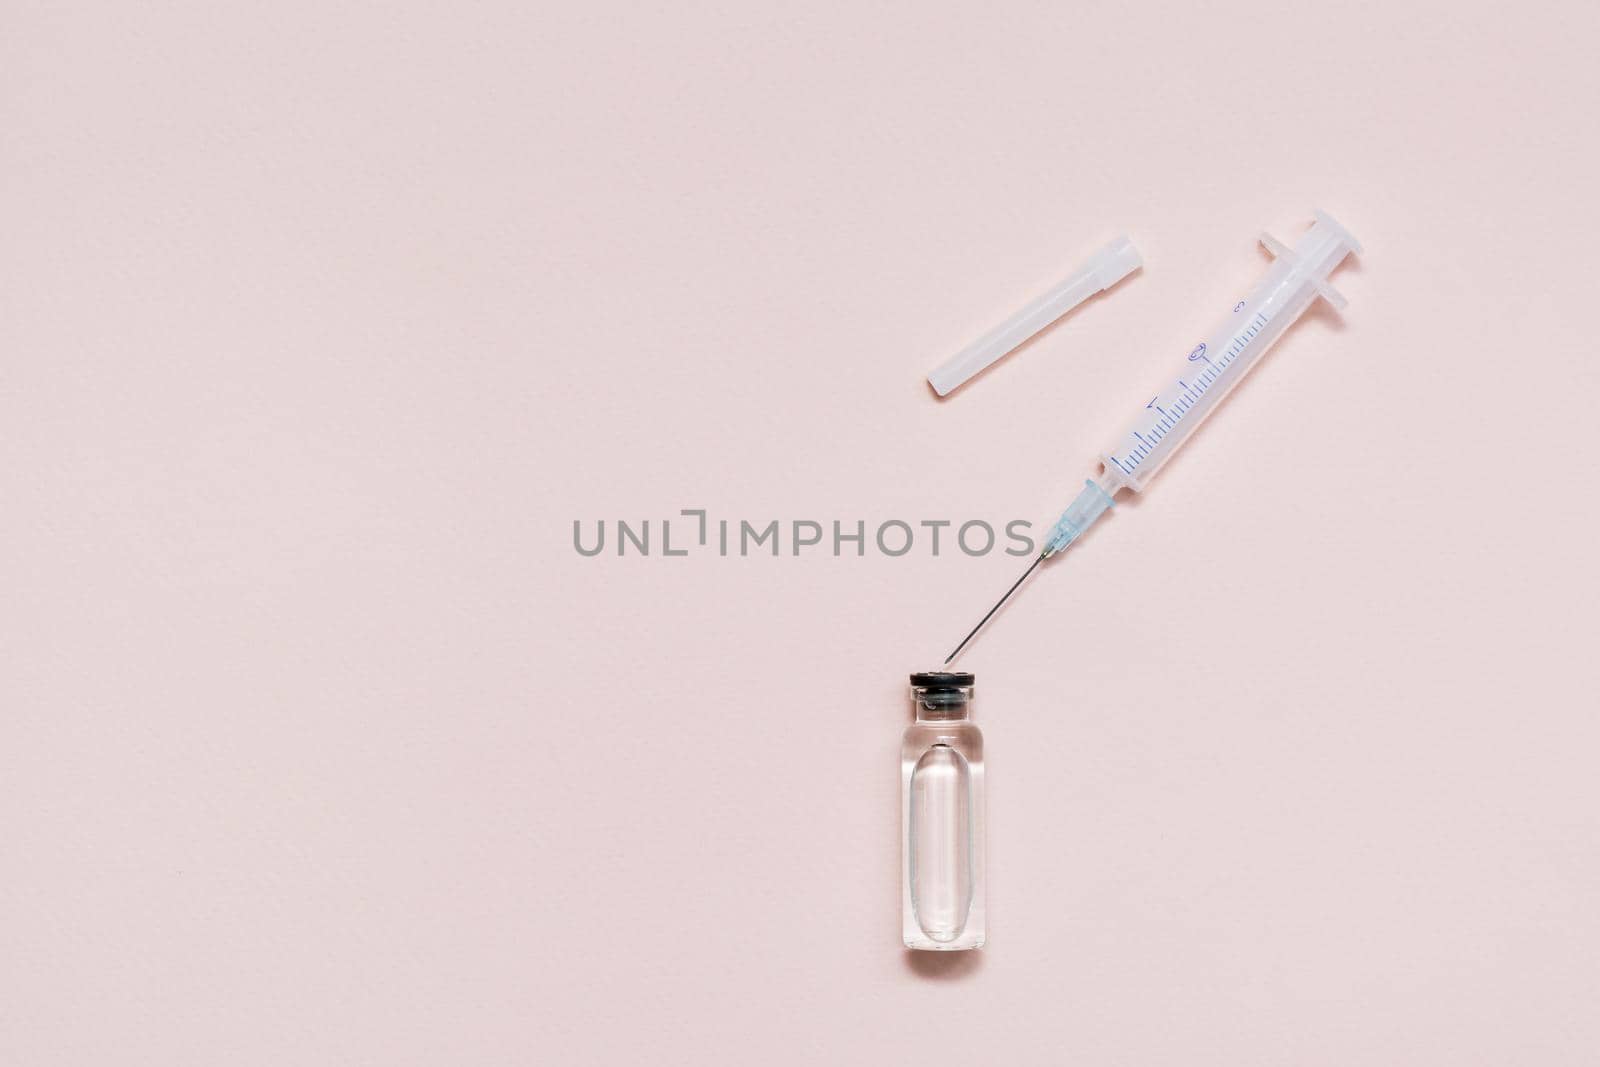 Vaccination and Immunization. Opened syringe over a glass vial with vaccine. Copy space